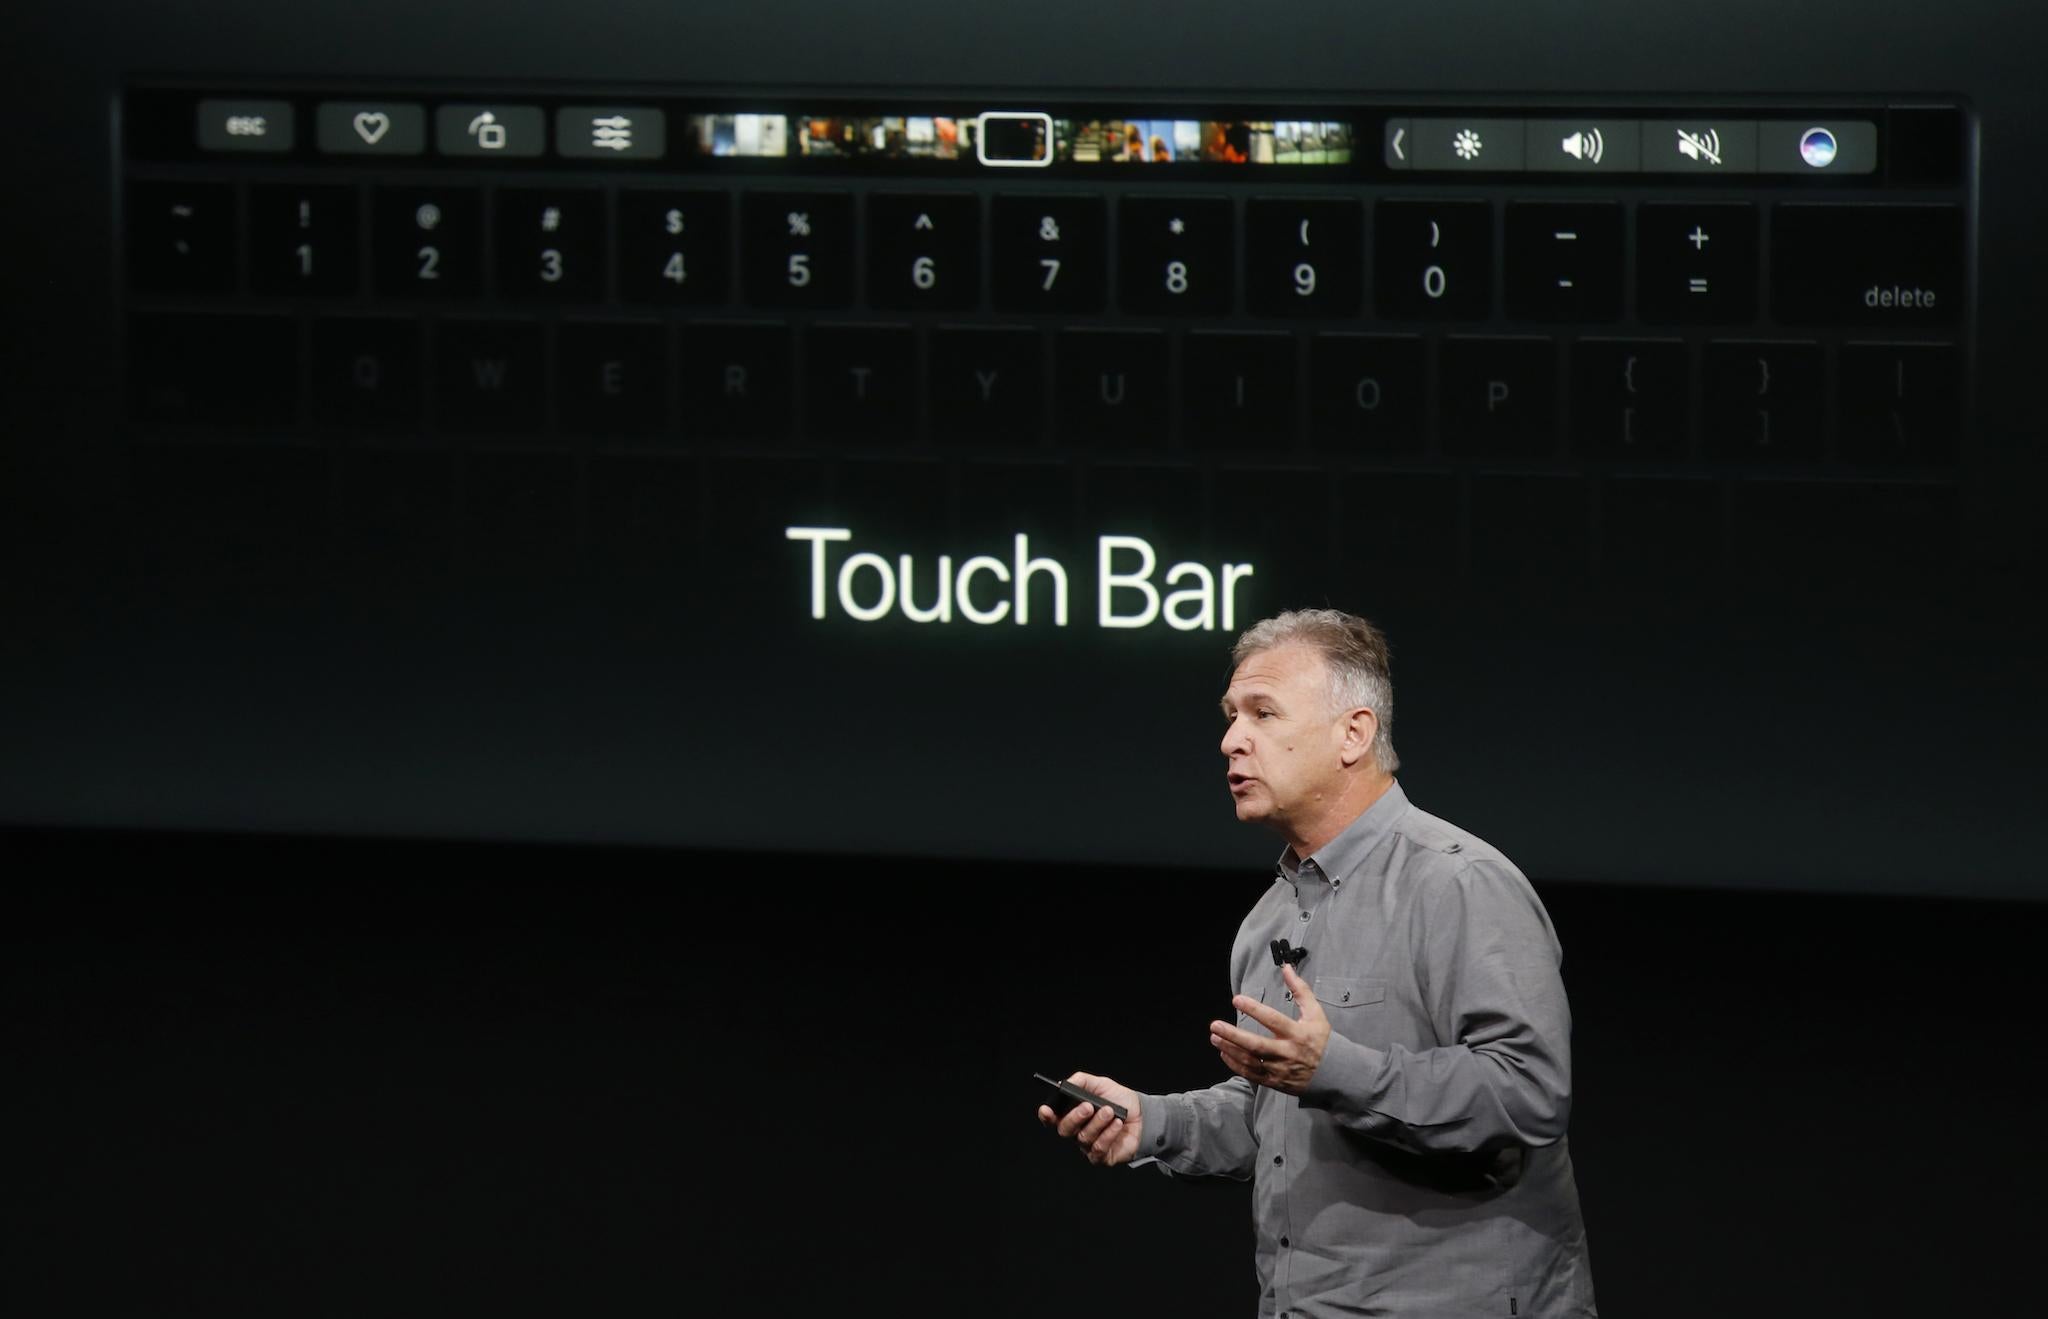 Phil Schiller, senior vice president of worldwide marketing at Apple, speaks under a graphic of the touchbar of a new MacBook Pro during an Apple media event in Cupertino, California, U.S. October 27, 2016